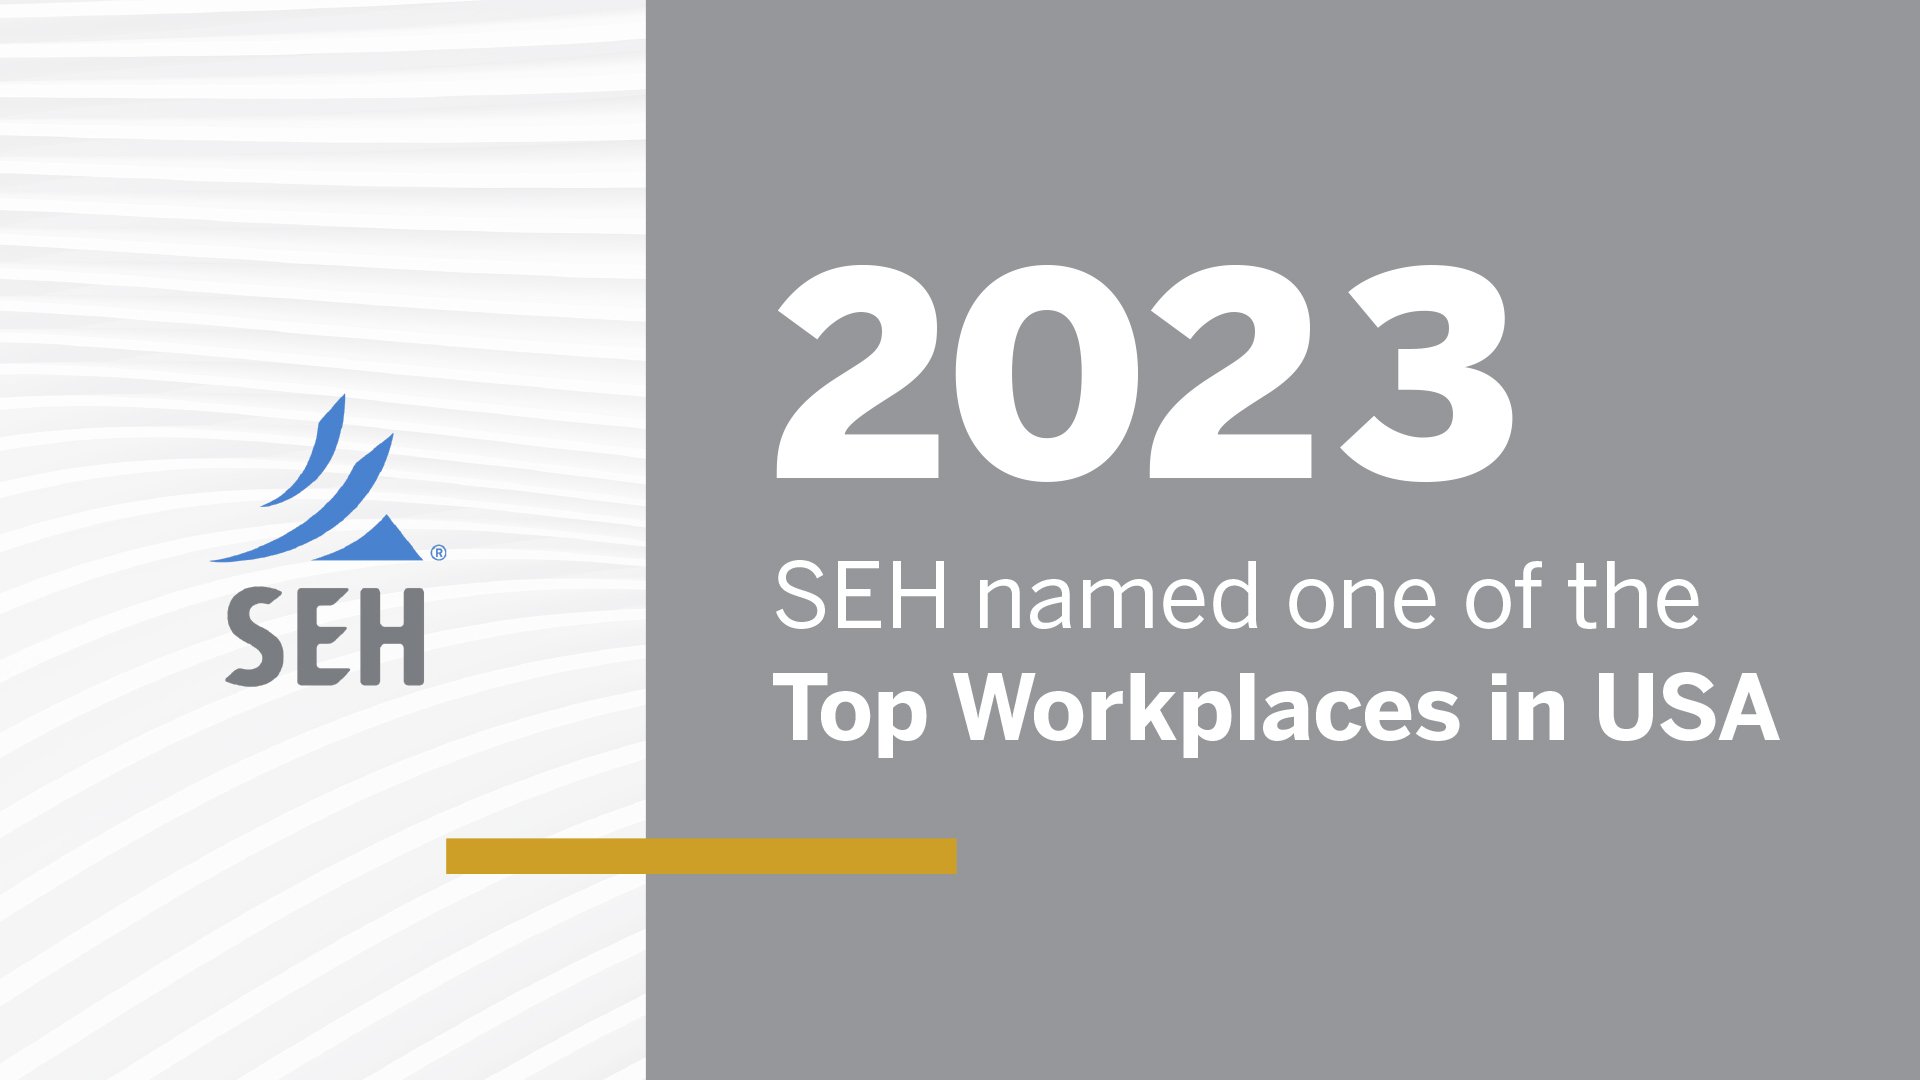 Graphic that has SEH logo and says "2023 SEH named one of the Top Workplaces in USA"